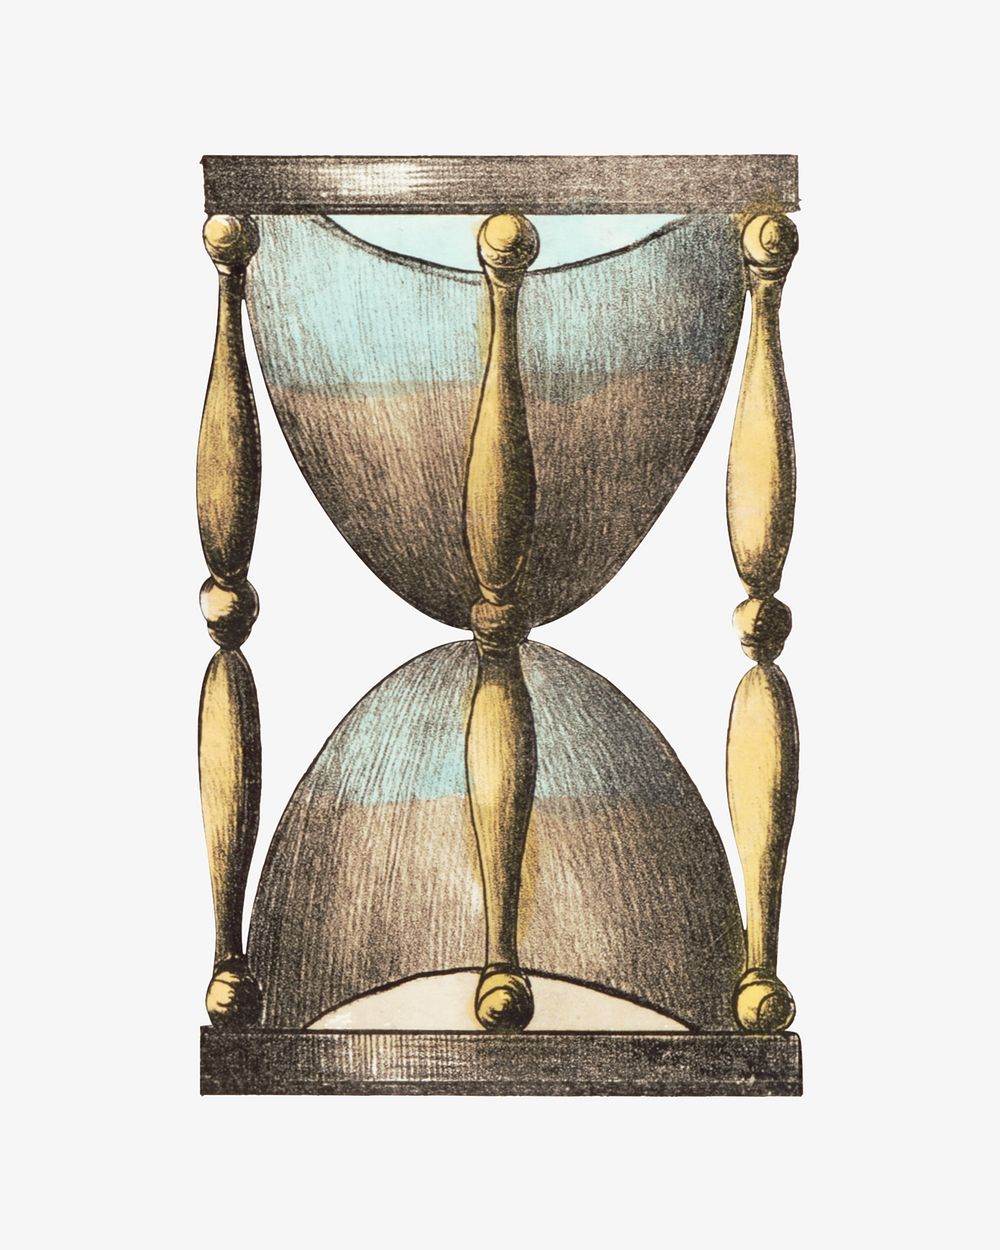 Hourglass, vintage object illustration. Remixed by rawpixel.